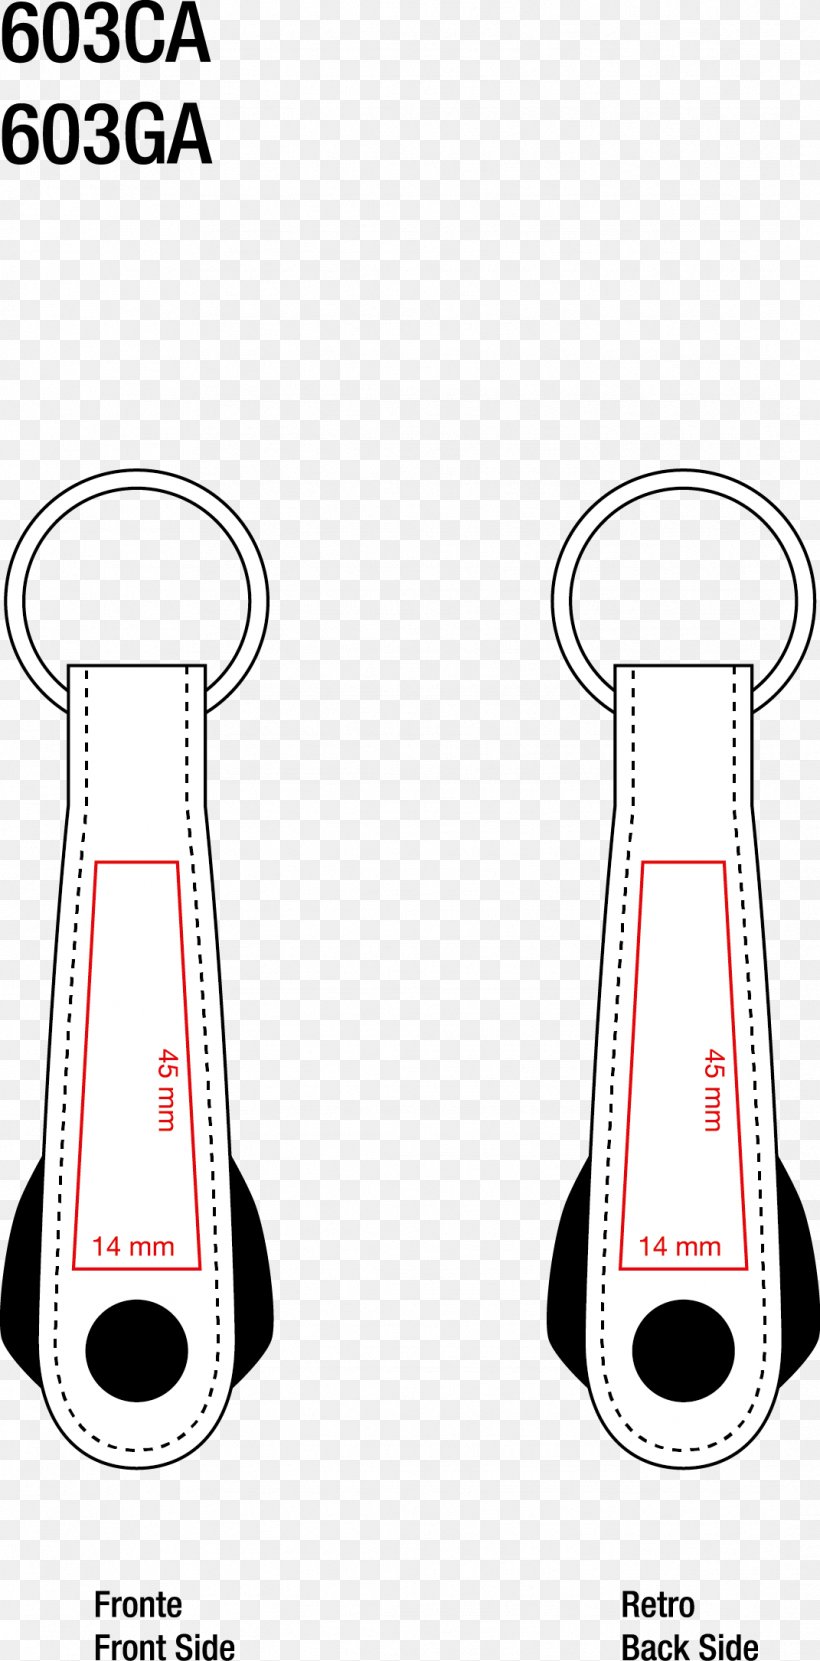 Personal Computer Key Chains Leather Industrial Design Pattern, PNG, 1071x2170px, Personal Computer, Drinkware, Industrial Design, Key Chains, Leather Download Free